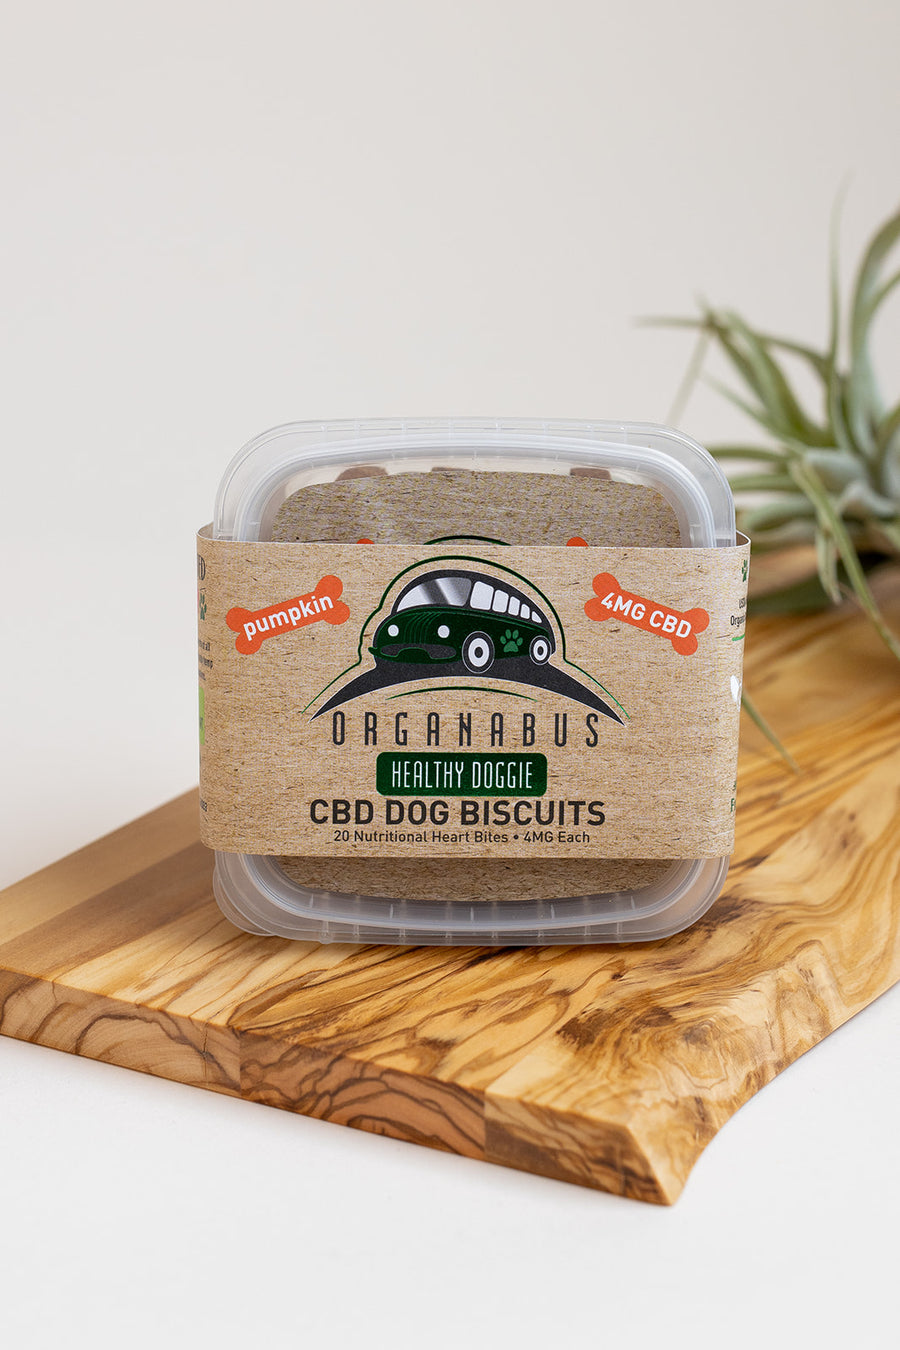 20 Healthy Dog Pet CBD Biscuits- 4 MG Each